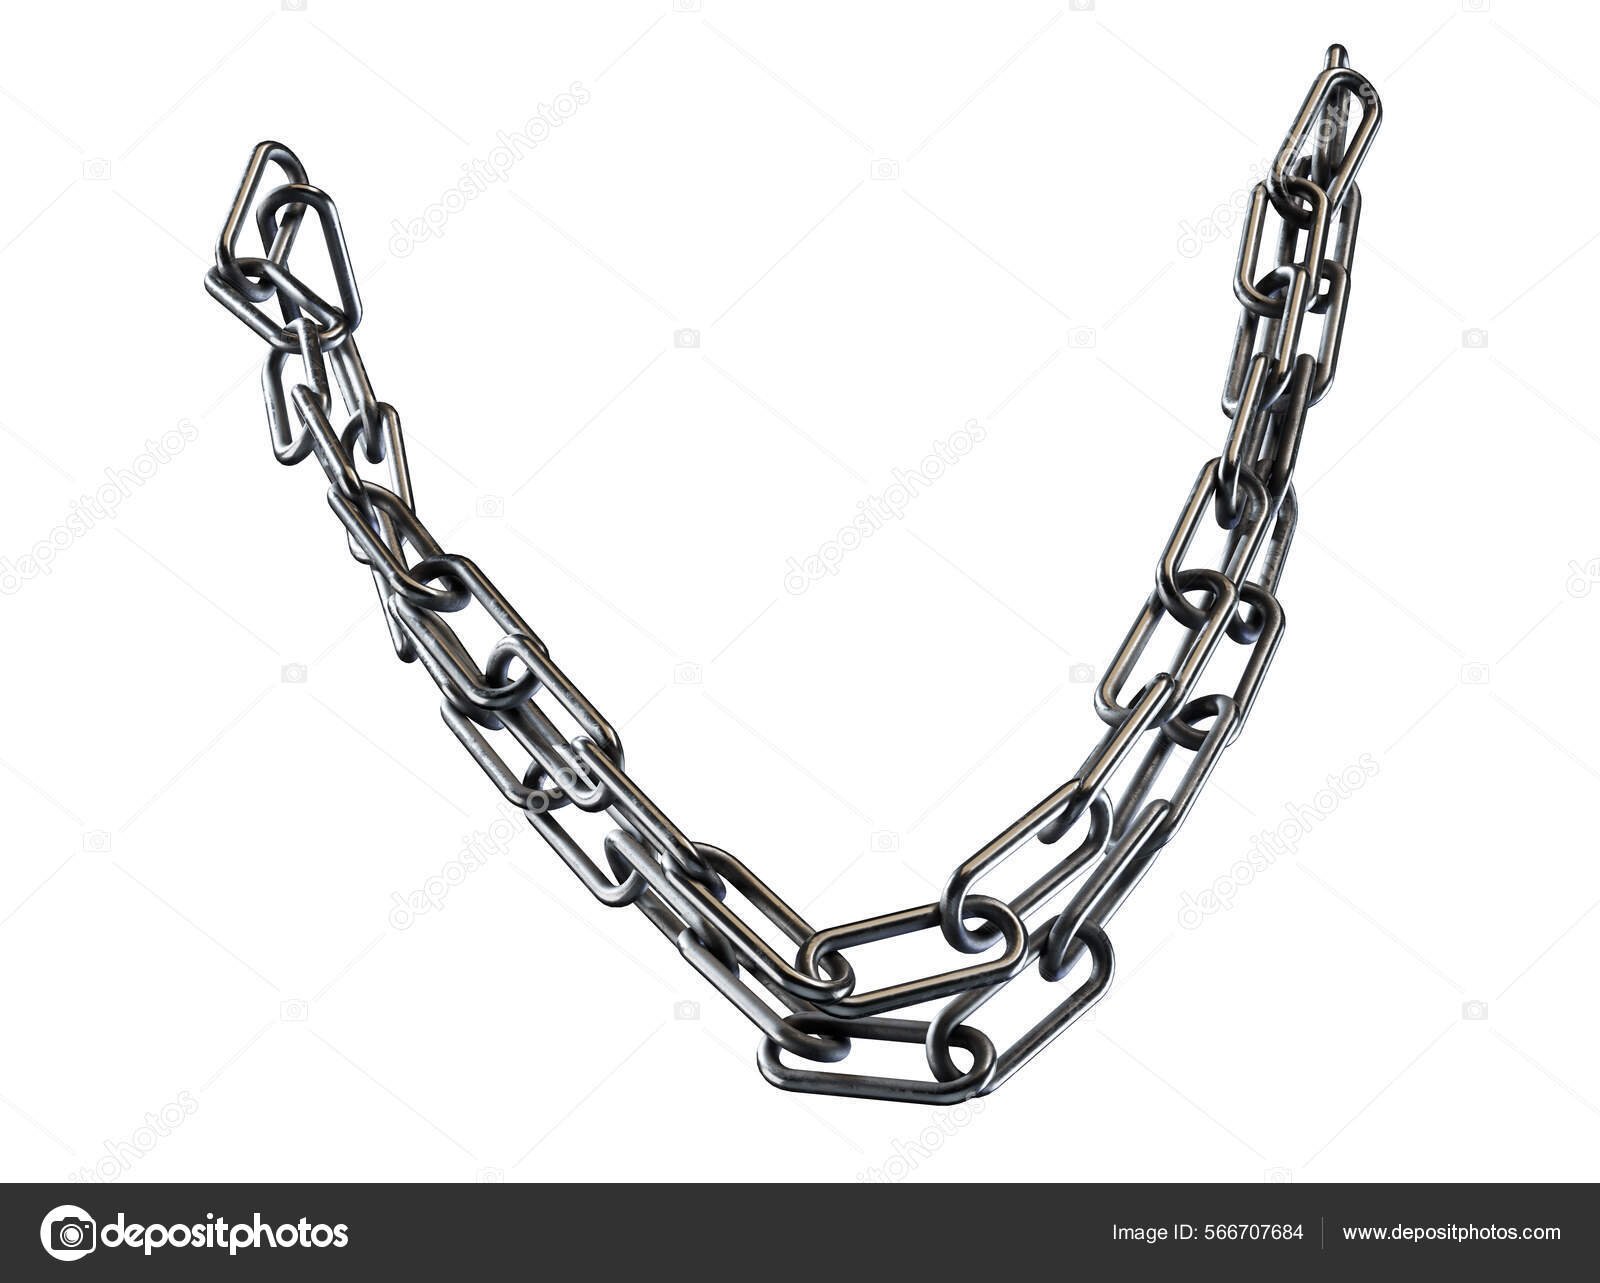 3d illustration of metal chain on isolated white background Stock